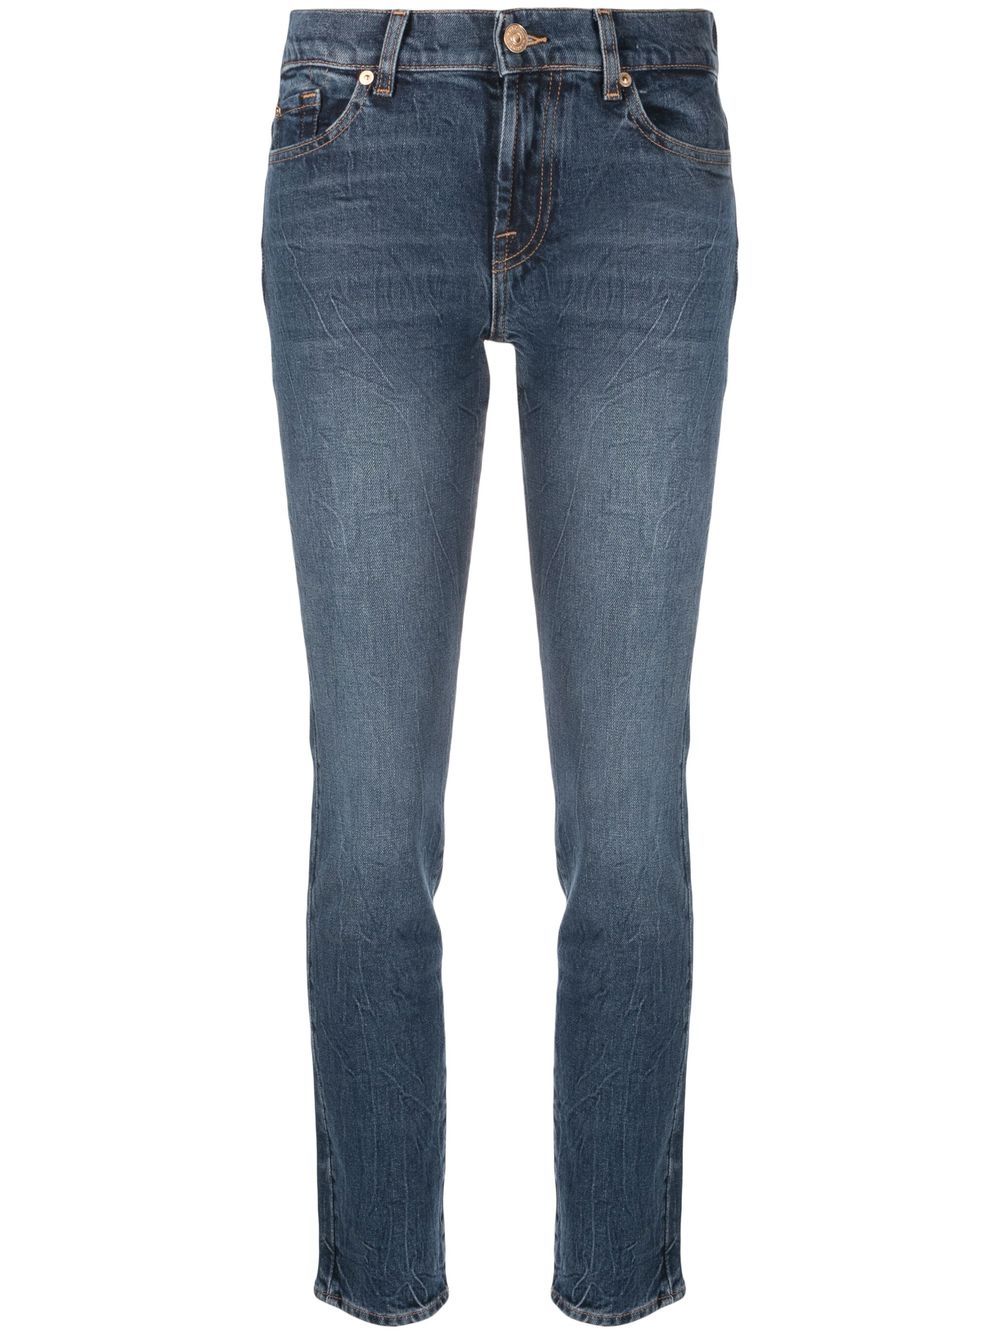 7 For All Mankind Roxanne Sideline slim-cut jeans - Blue von 7 For All Mankind